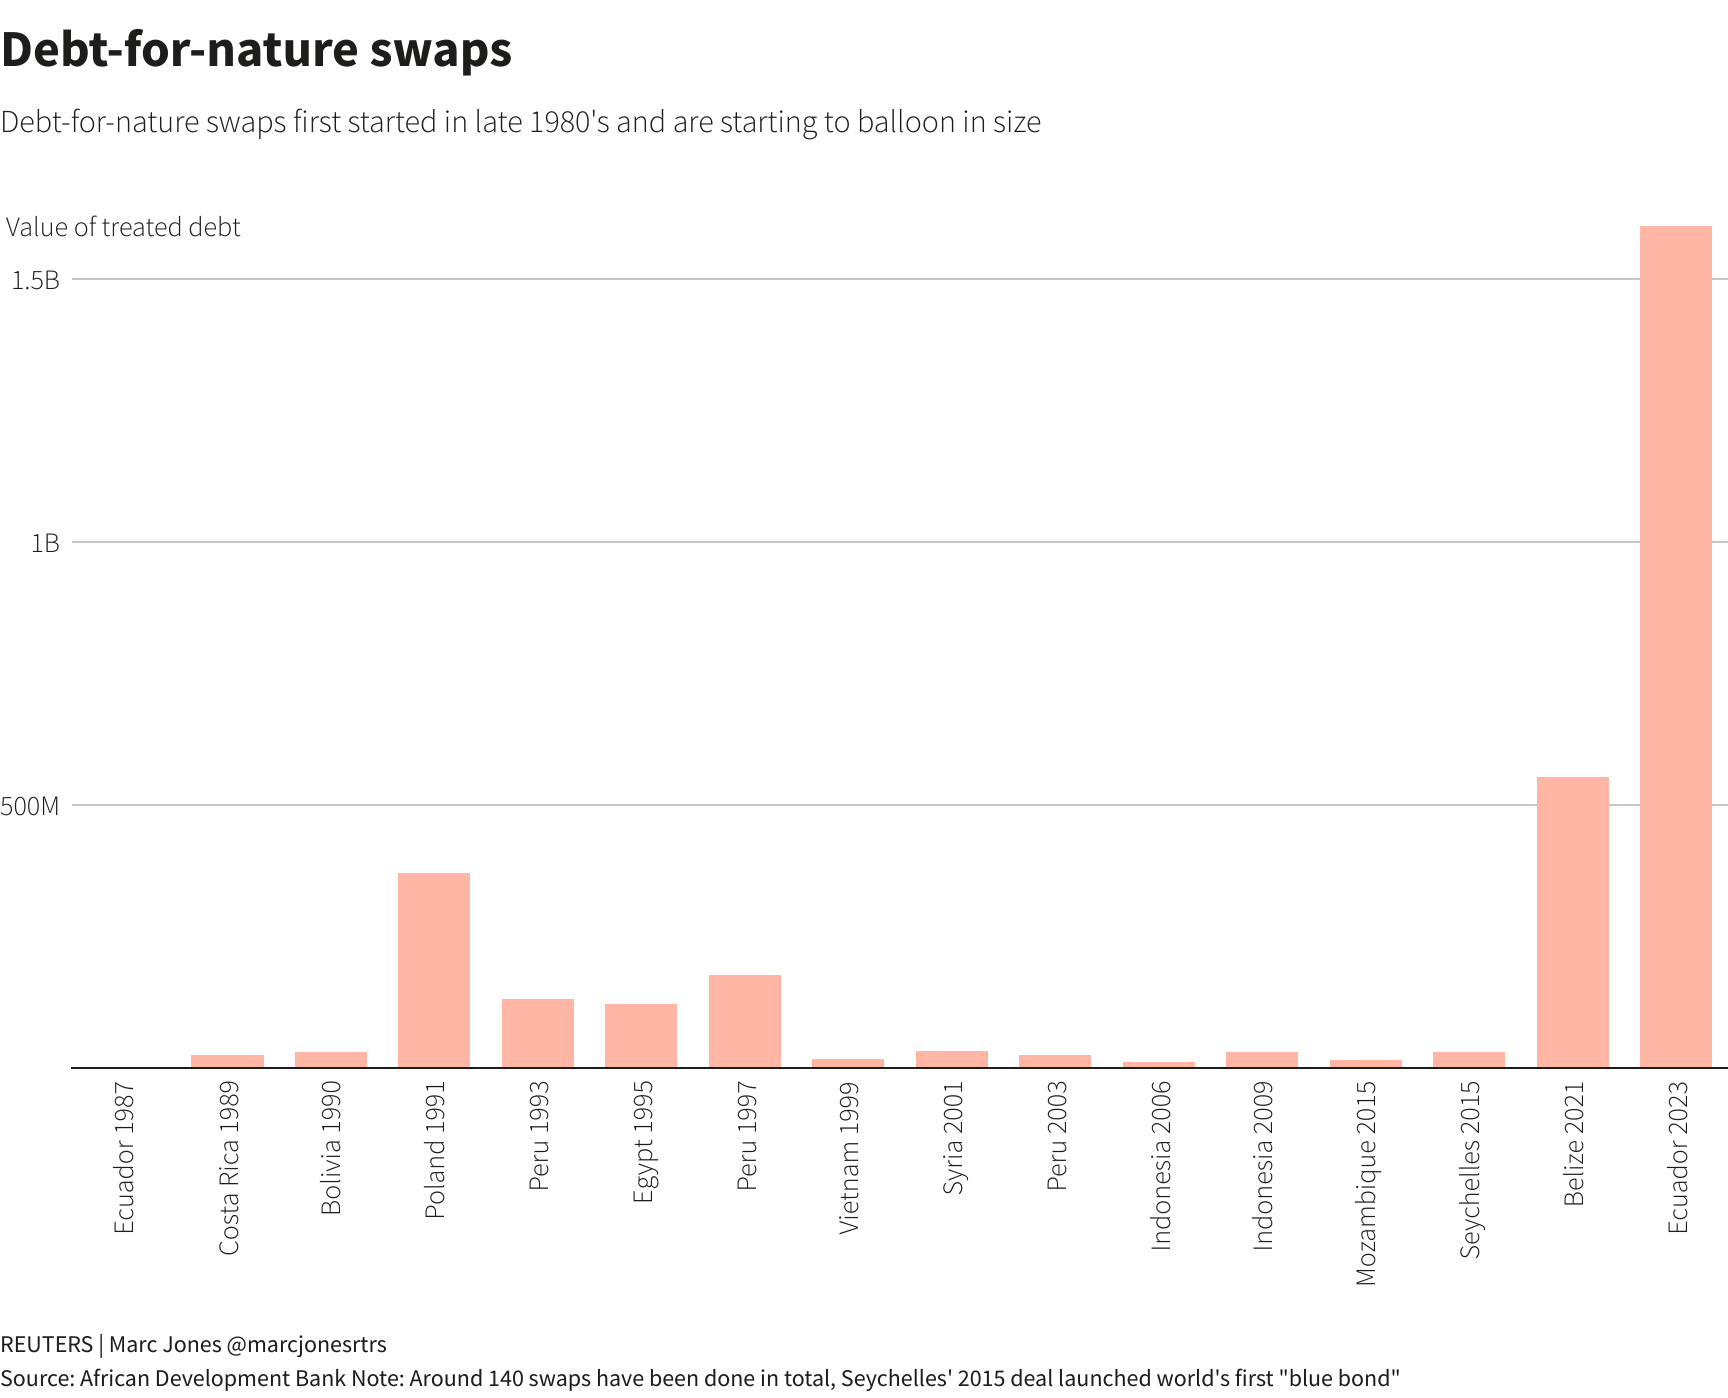 Debt-for-nature swaps